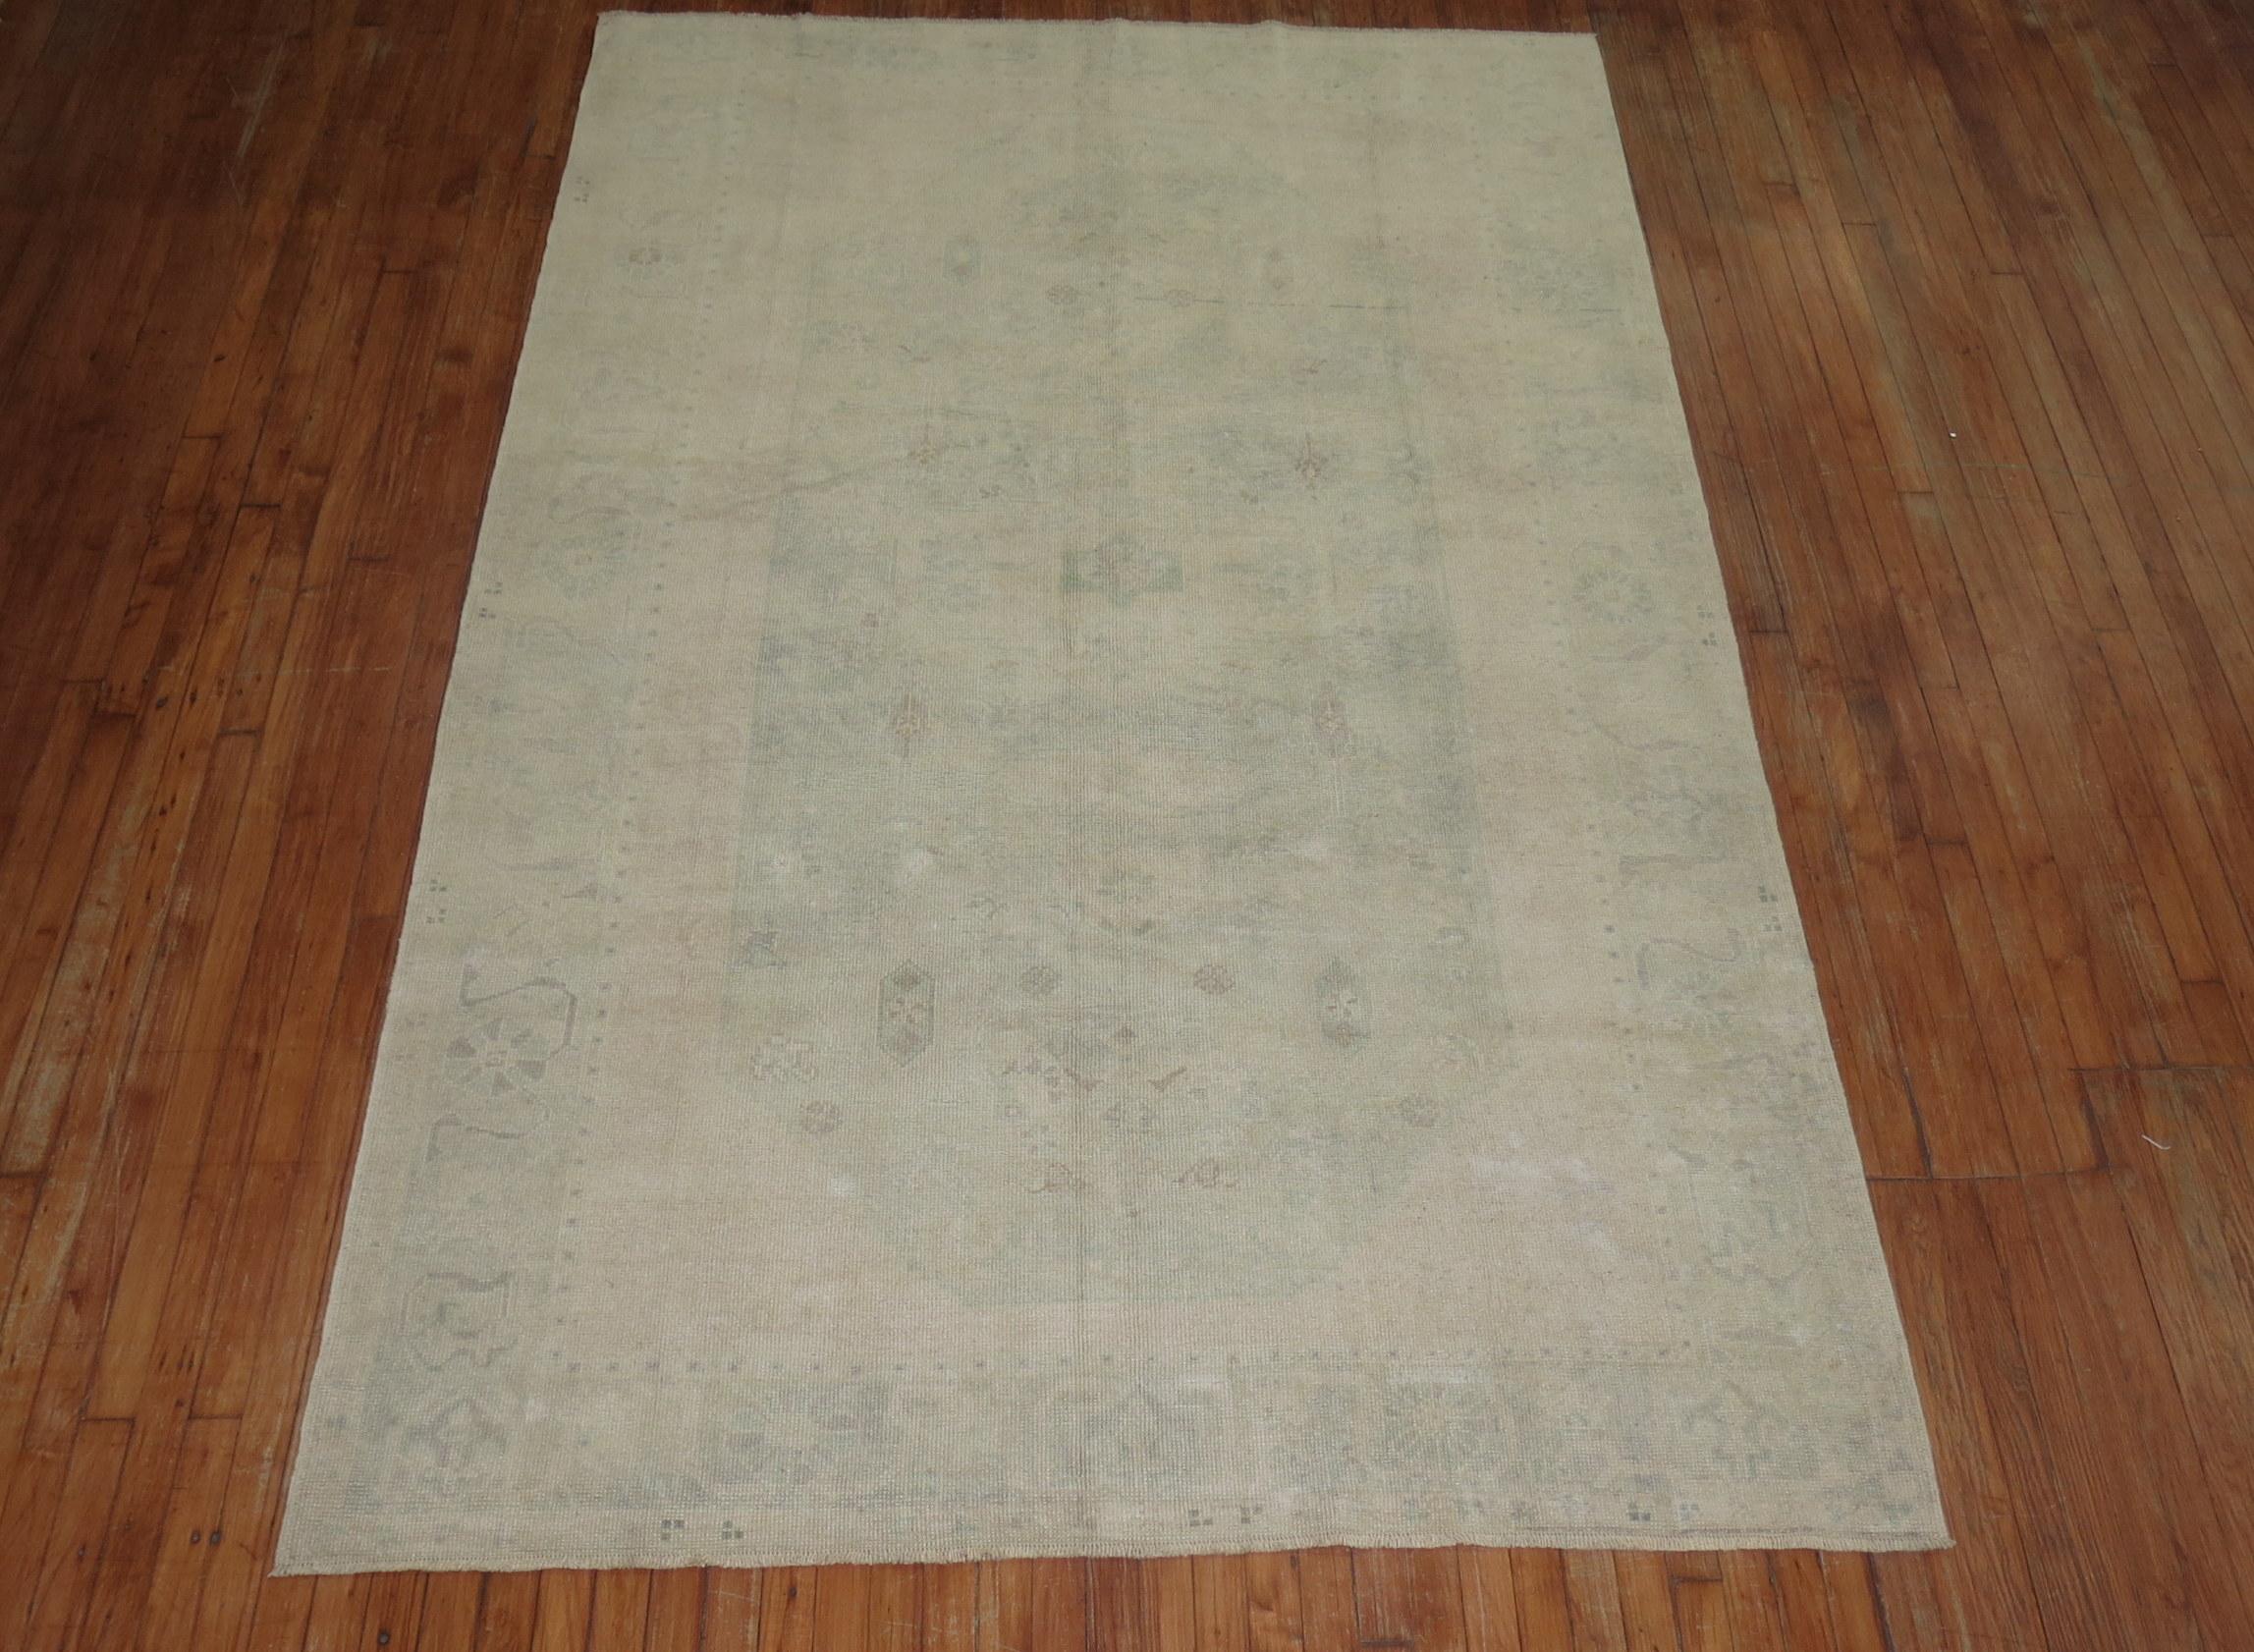 MId 20th century Pale green and cream Turkish Oushak rug

Measures: 6' x 9'4''.